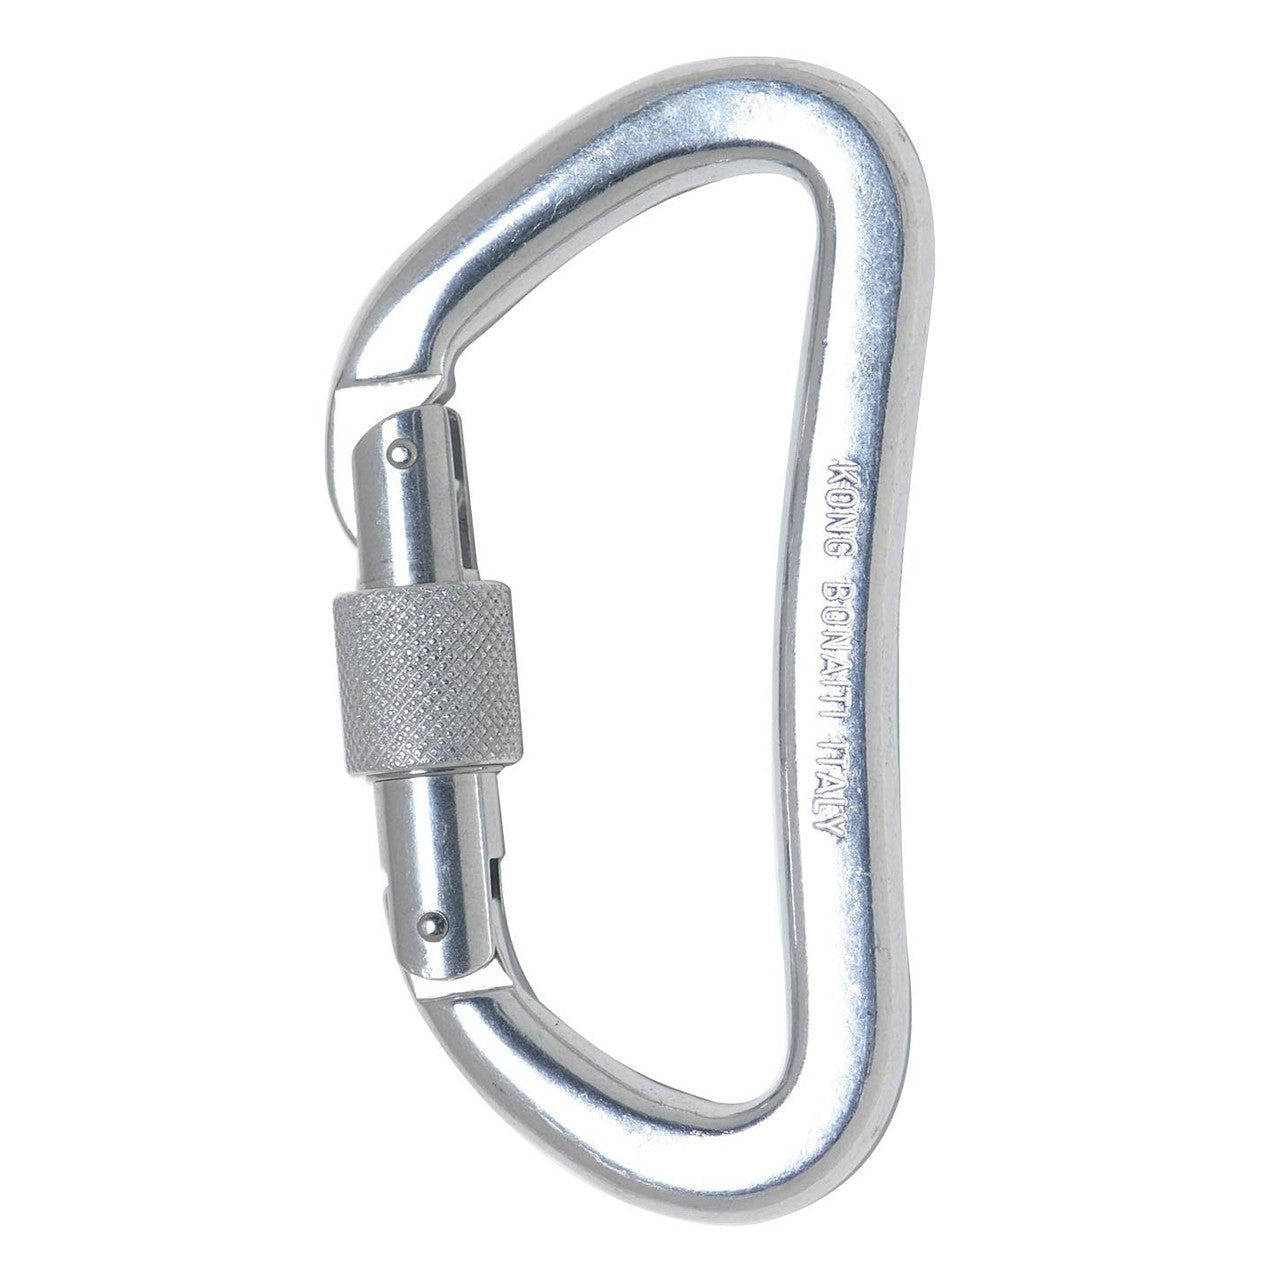 US Rigging Supply KNG-733-A1 Screw Lock Guide Carabiner